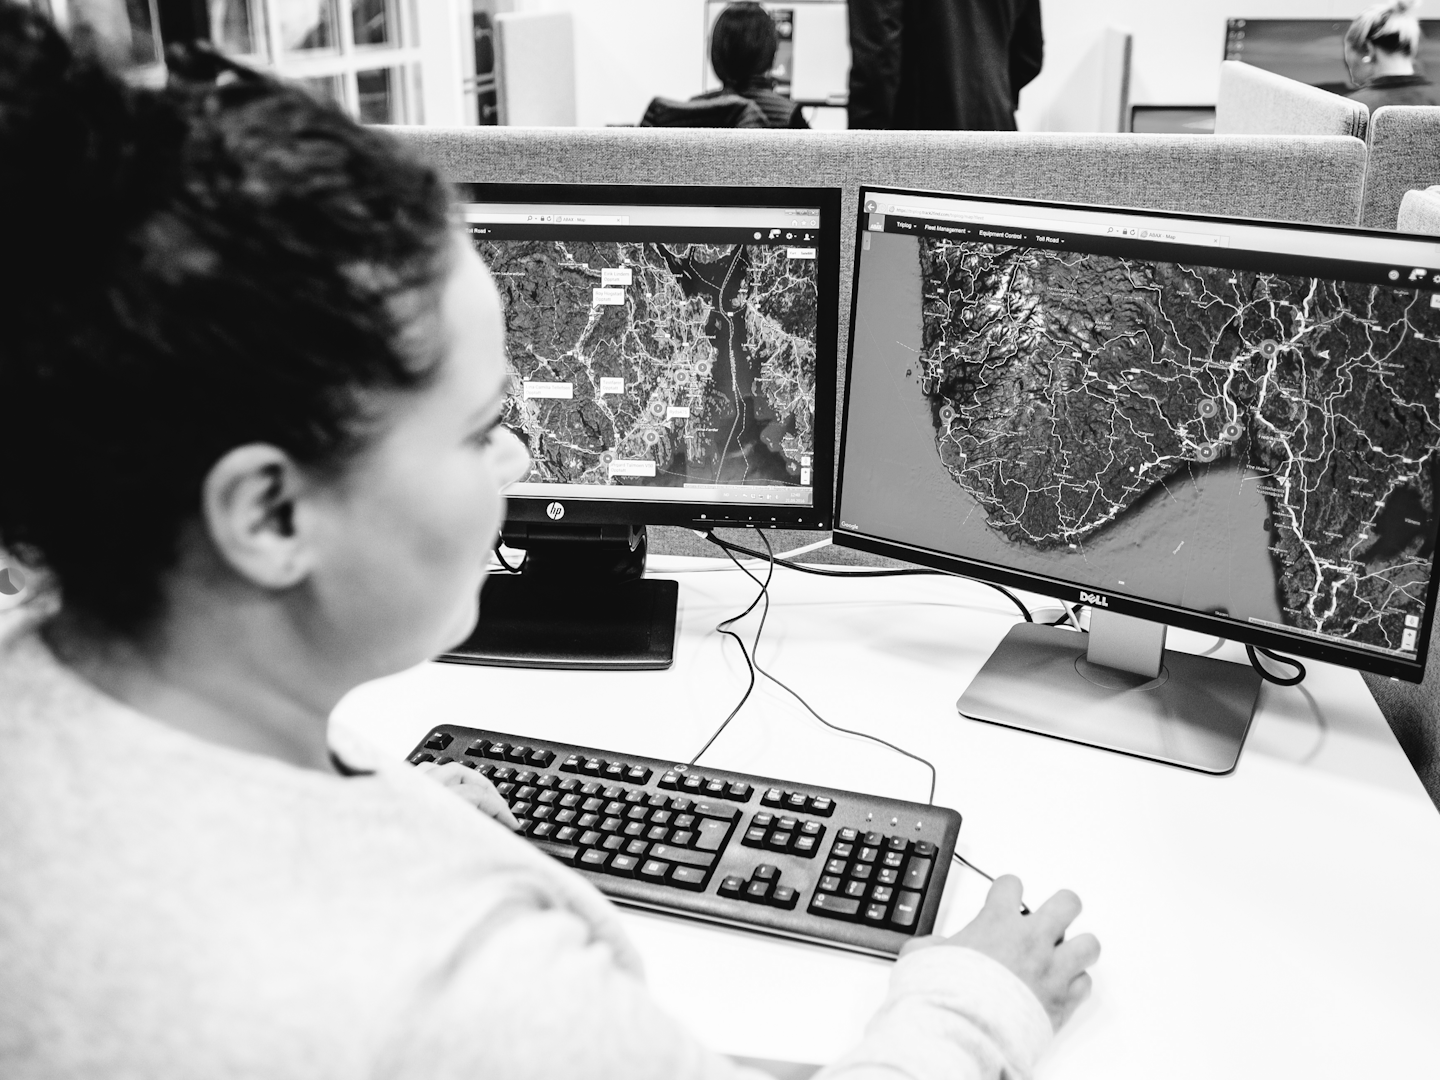 Woman looking at computer screen which shows a map in black and white